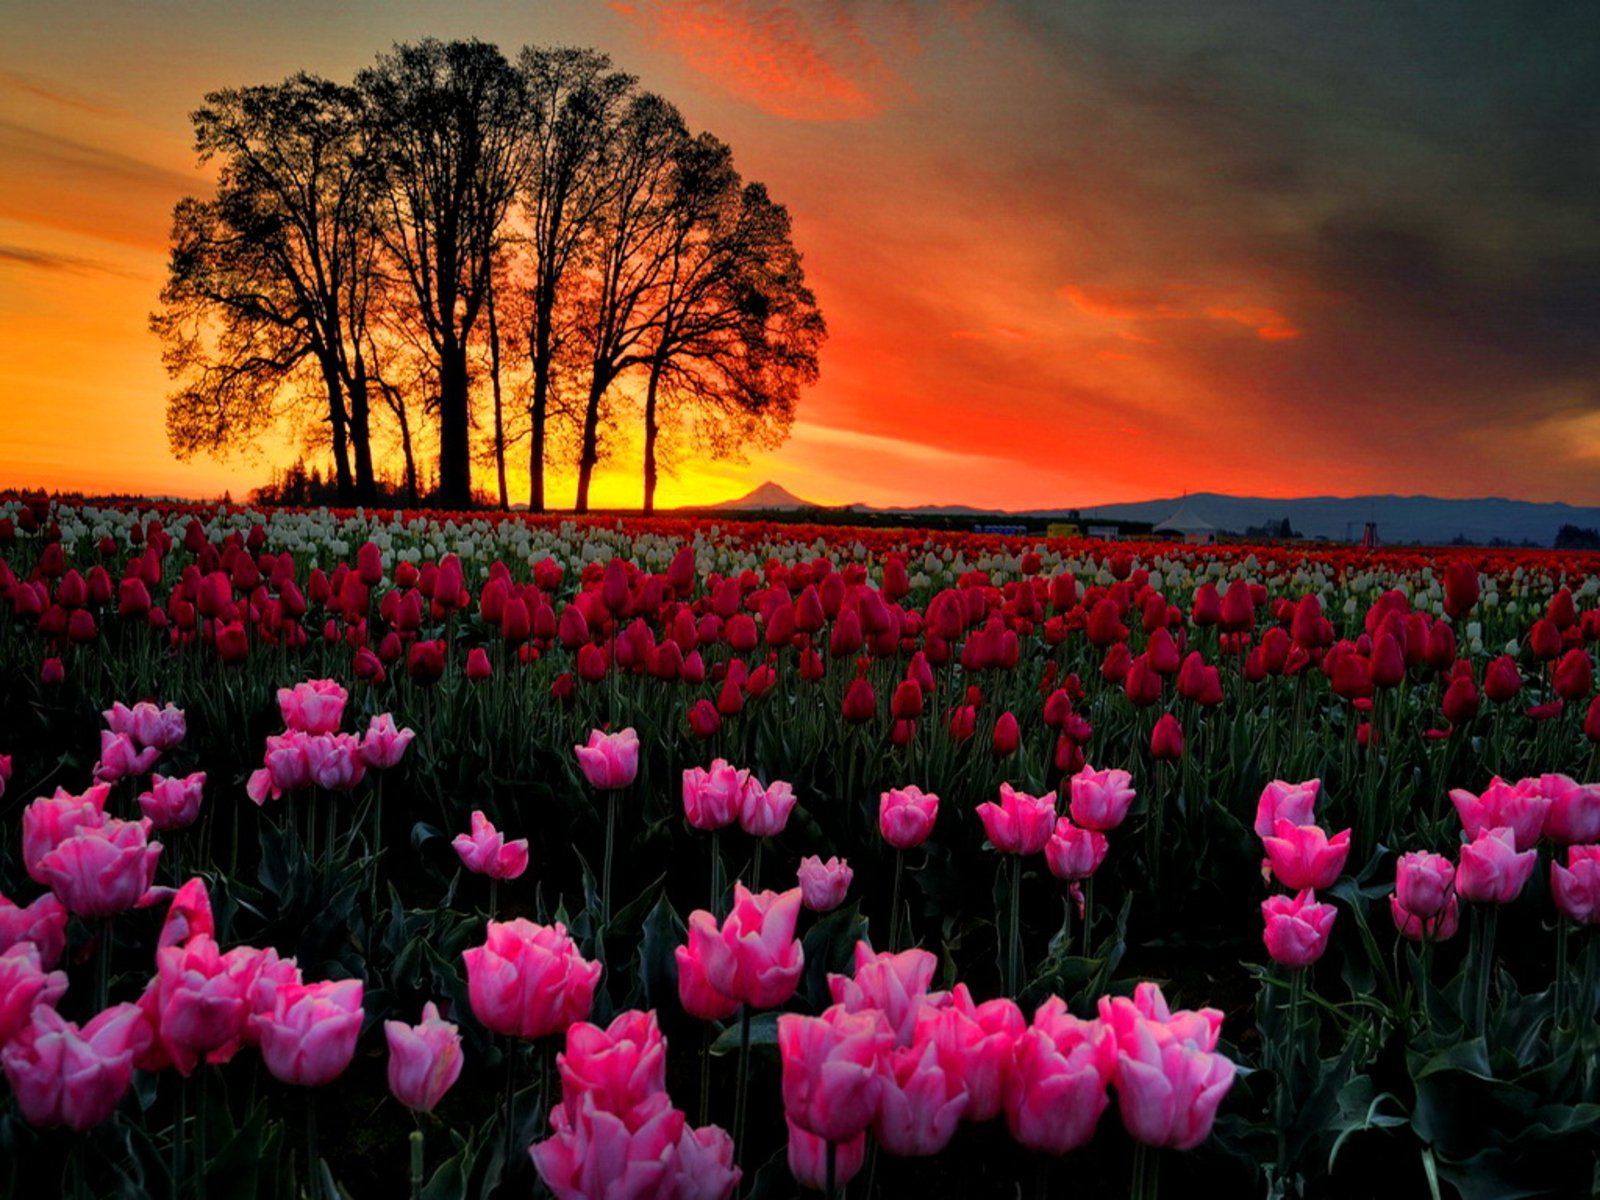 Sunset over a field of tulips - Tulip